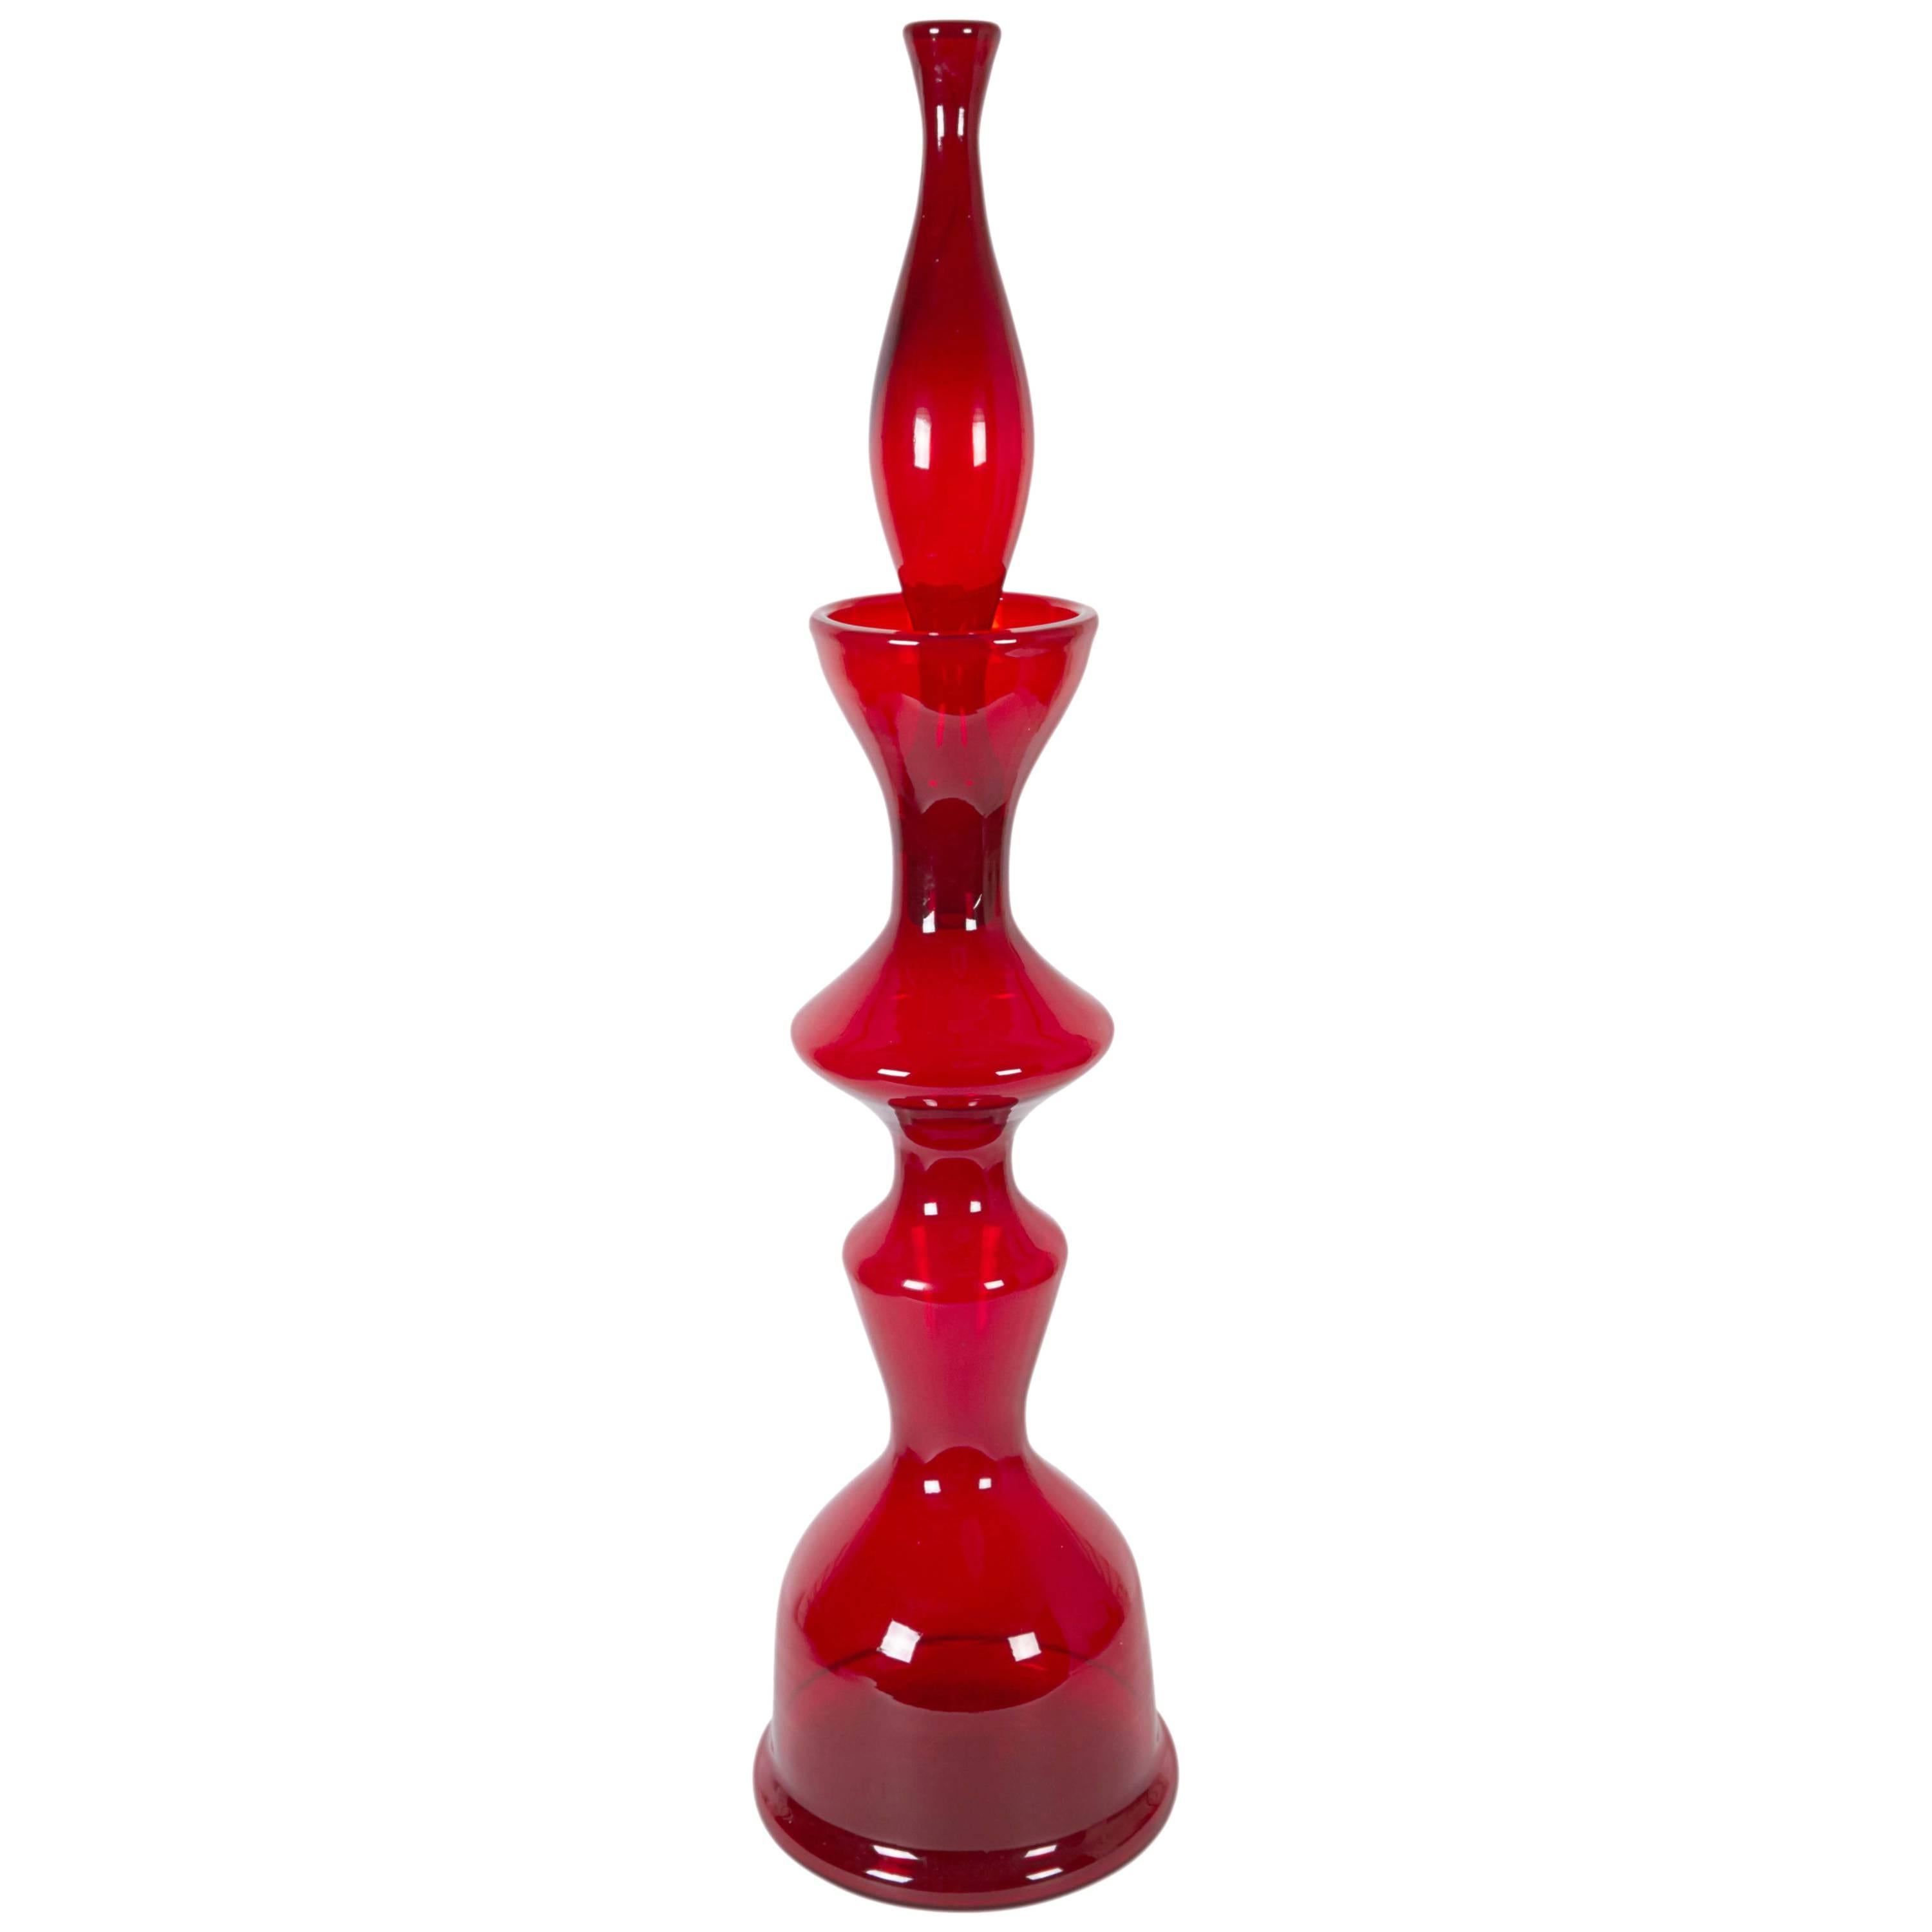 Blenko 'Chess Piece' Decanter Ruby Red Blown Glass by Wayne Husted